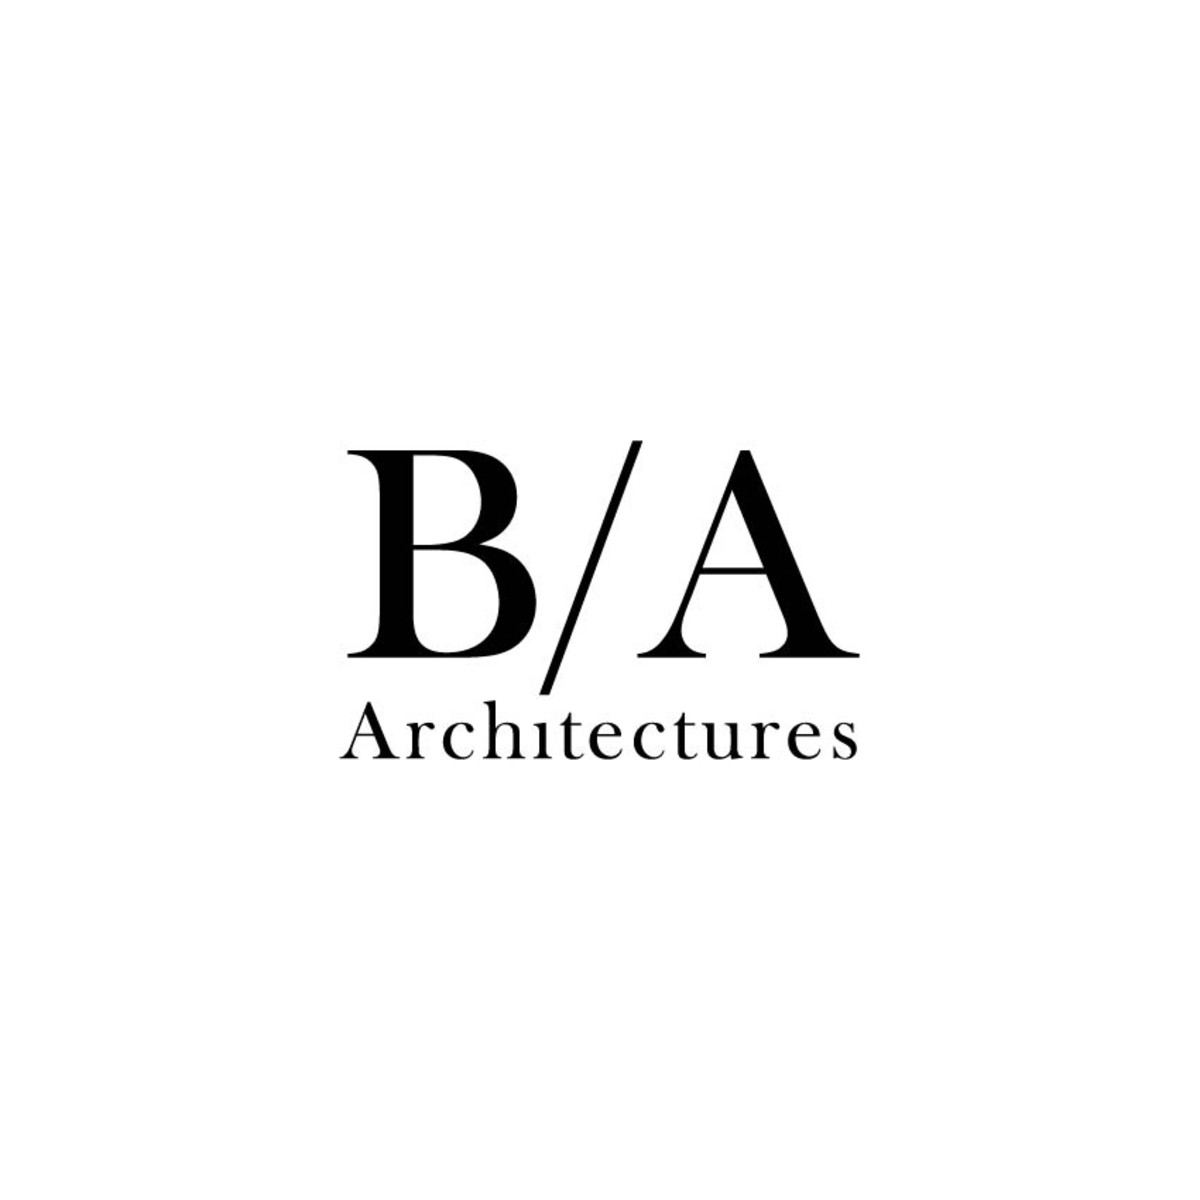 B/A Architectures